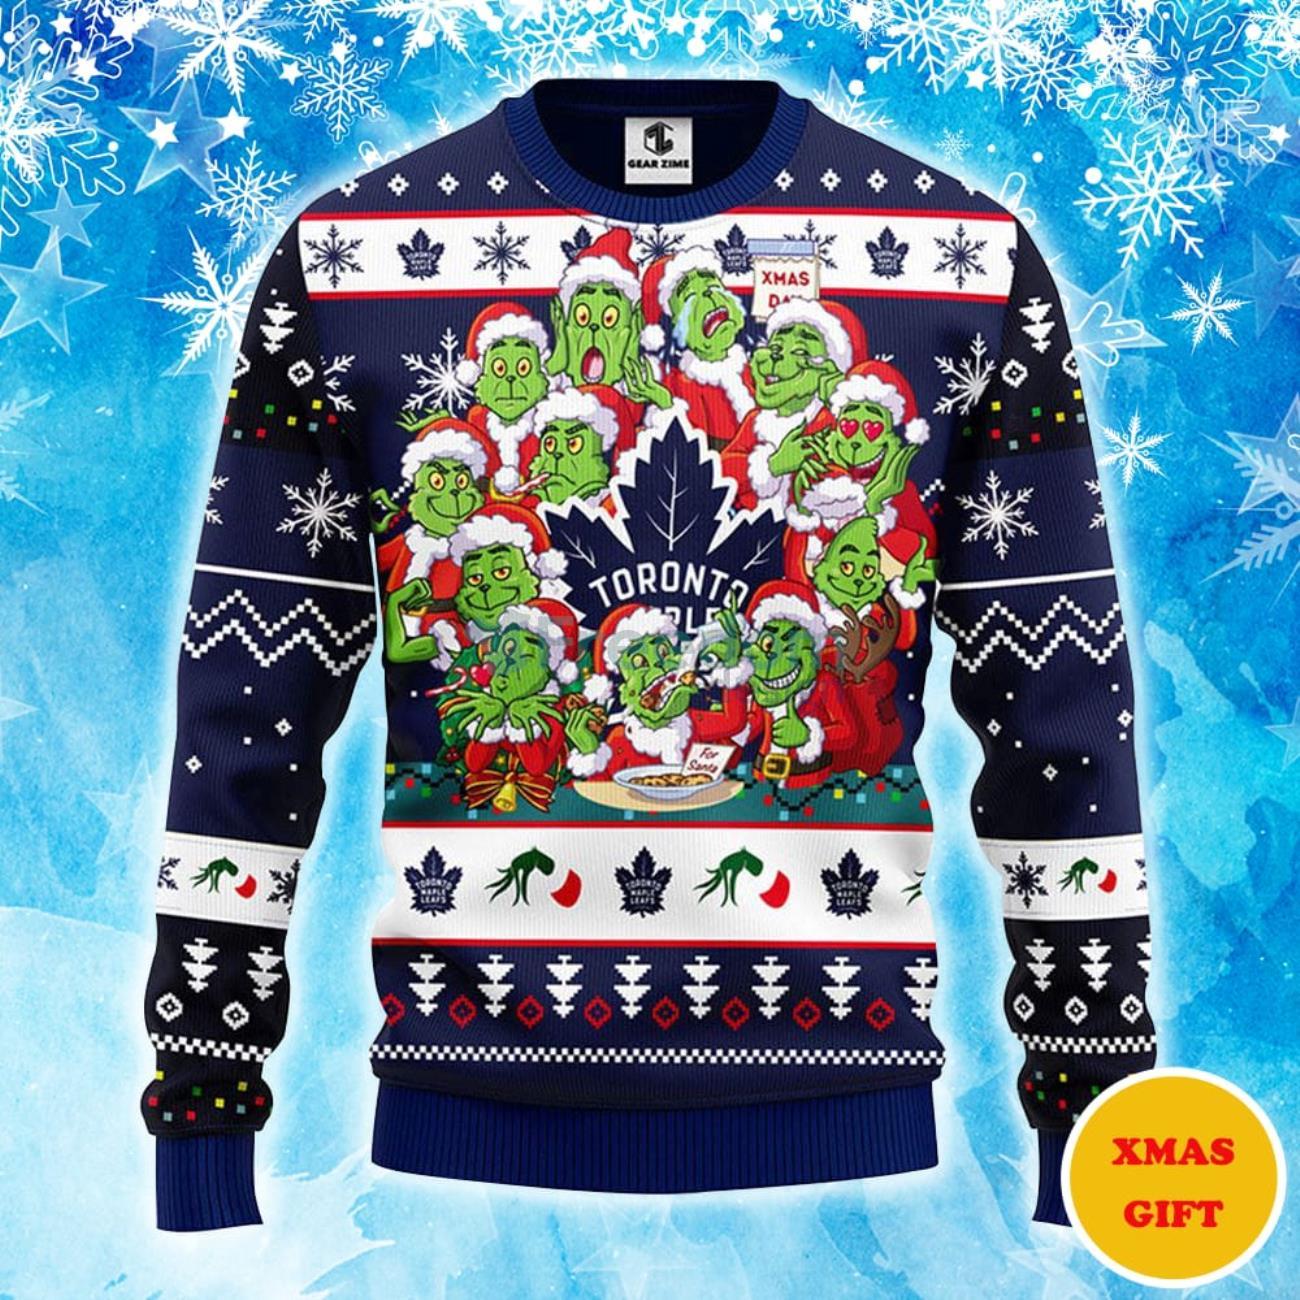 Toronto Maple Leafs Fans Pattern Merry Ugly Christmas Sweater -  Freedomdesign